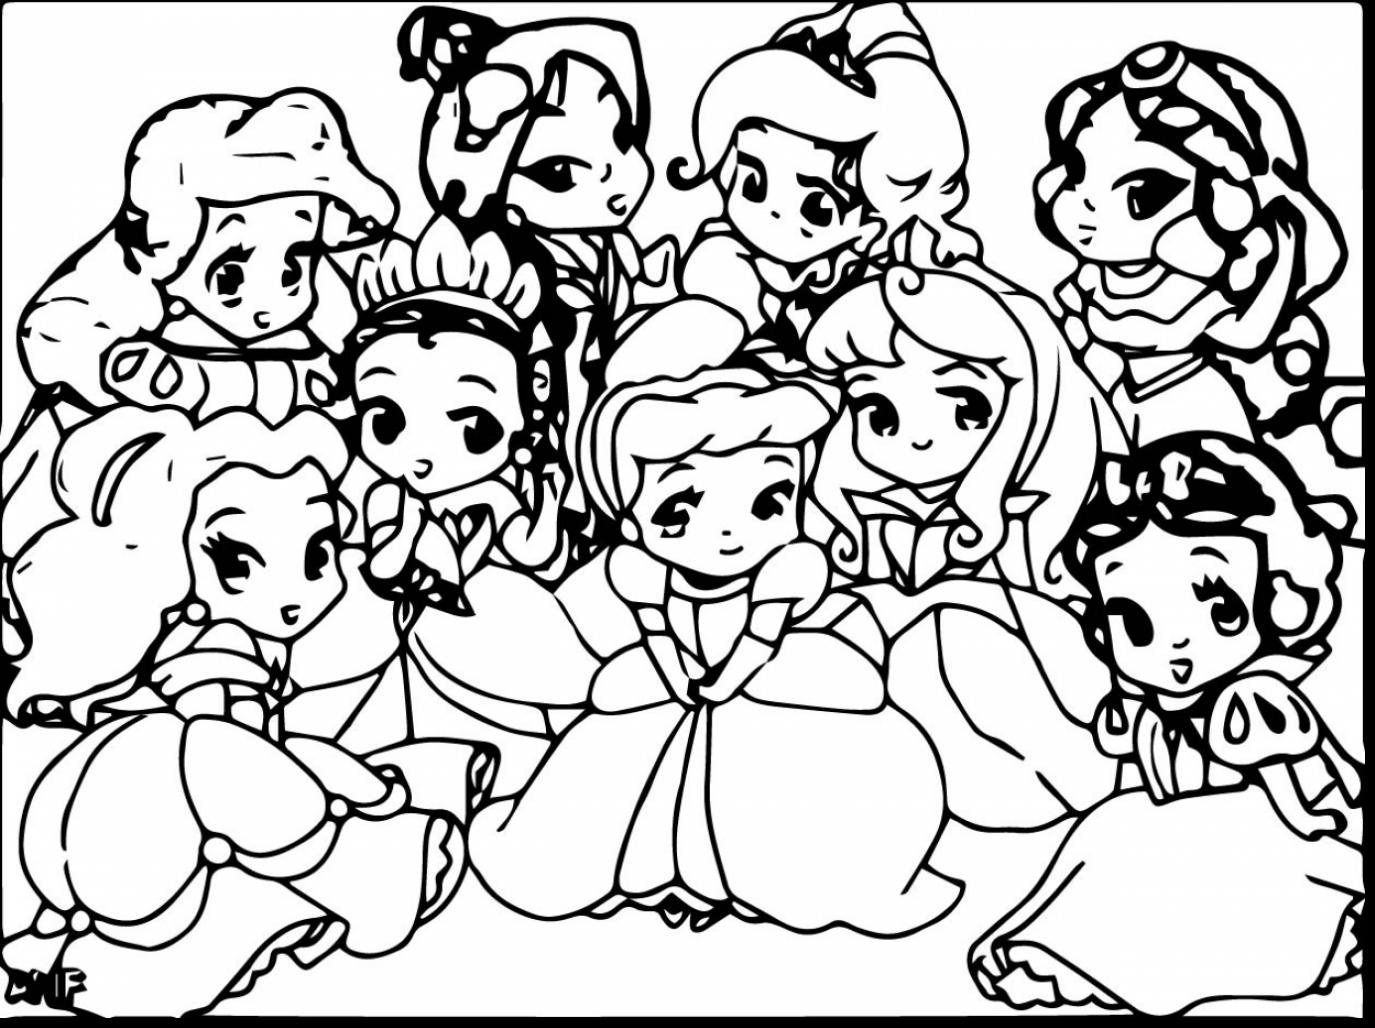 Easy Princess Coloring Pages at Free printable